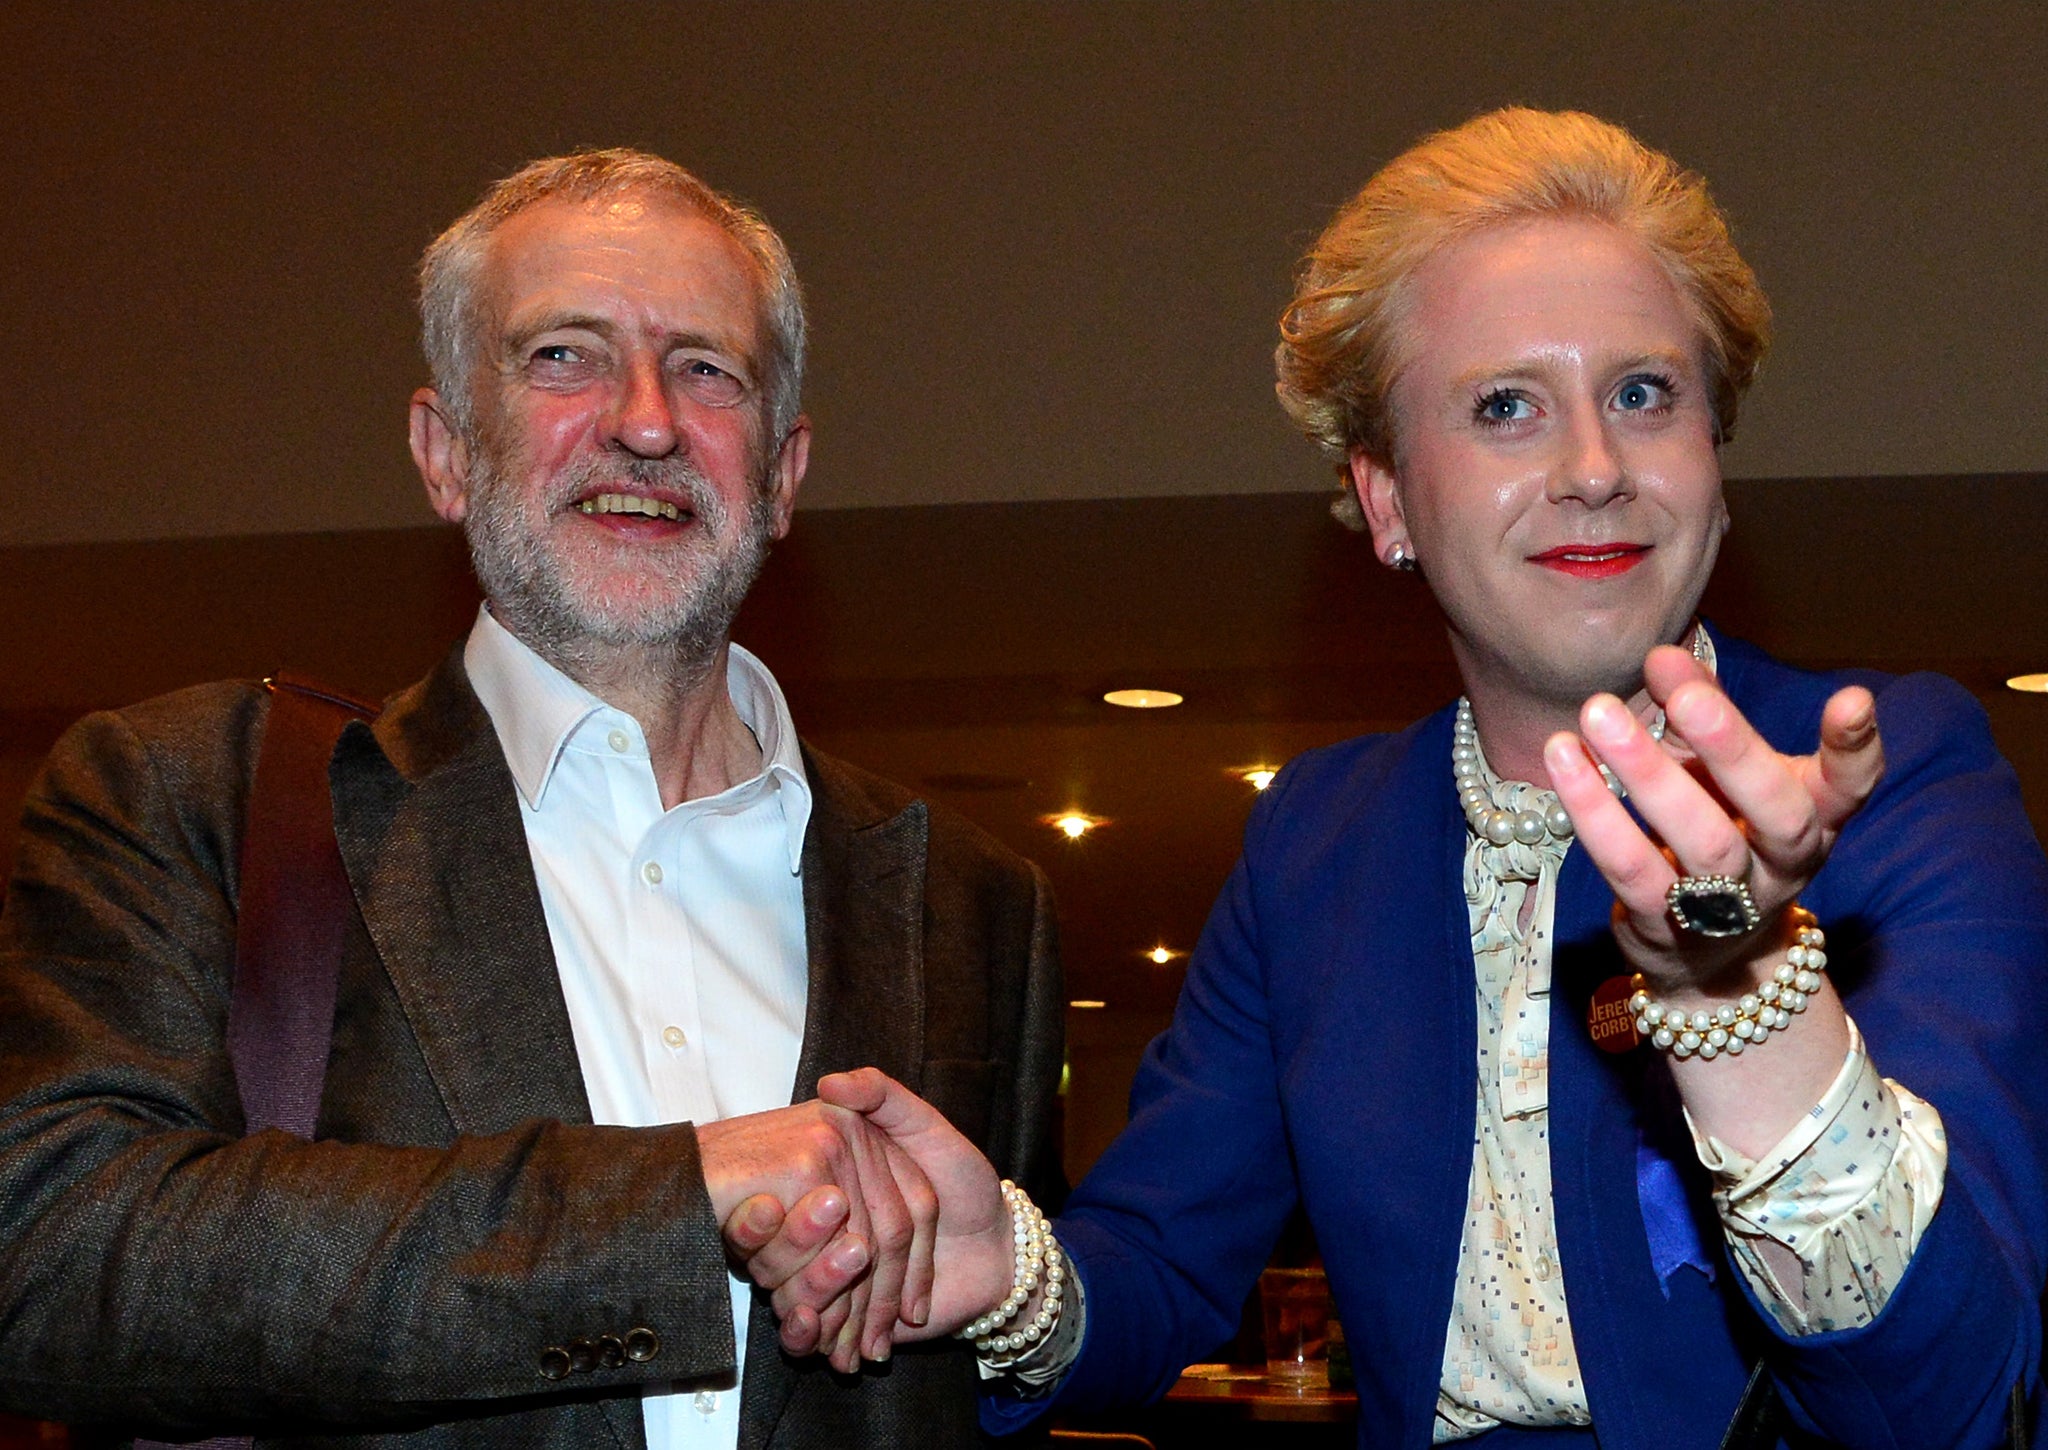 Jeremy Corbyn meets Edinburgh Fringe Festival comedy act Margaret Thatcher Queen of Soho while he campaigns in Scotland on August 14, 2015